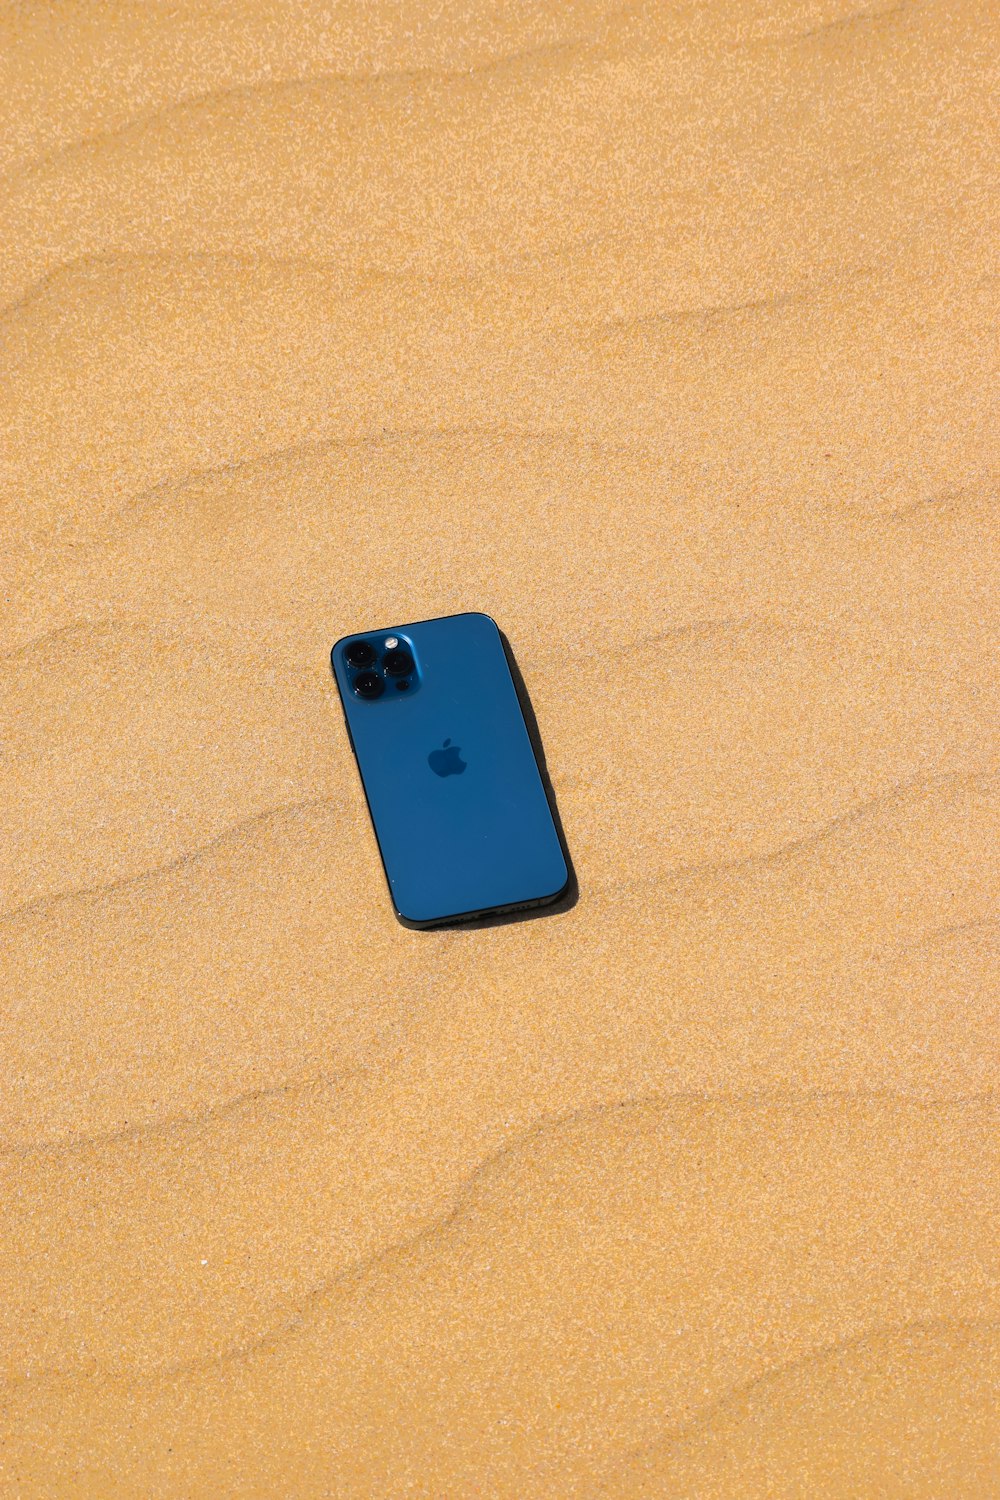 blue iphone case on brown sand